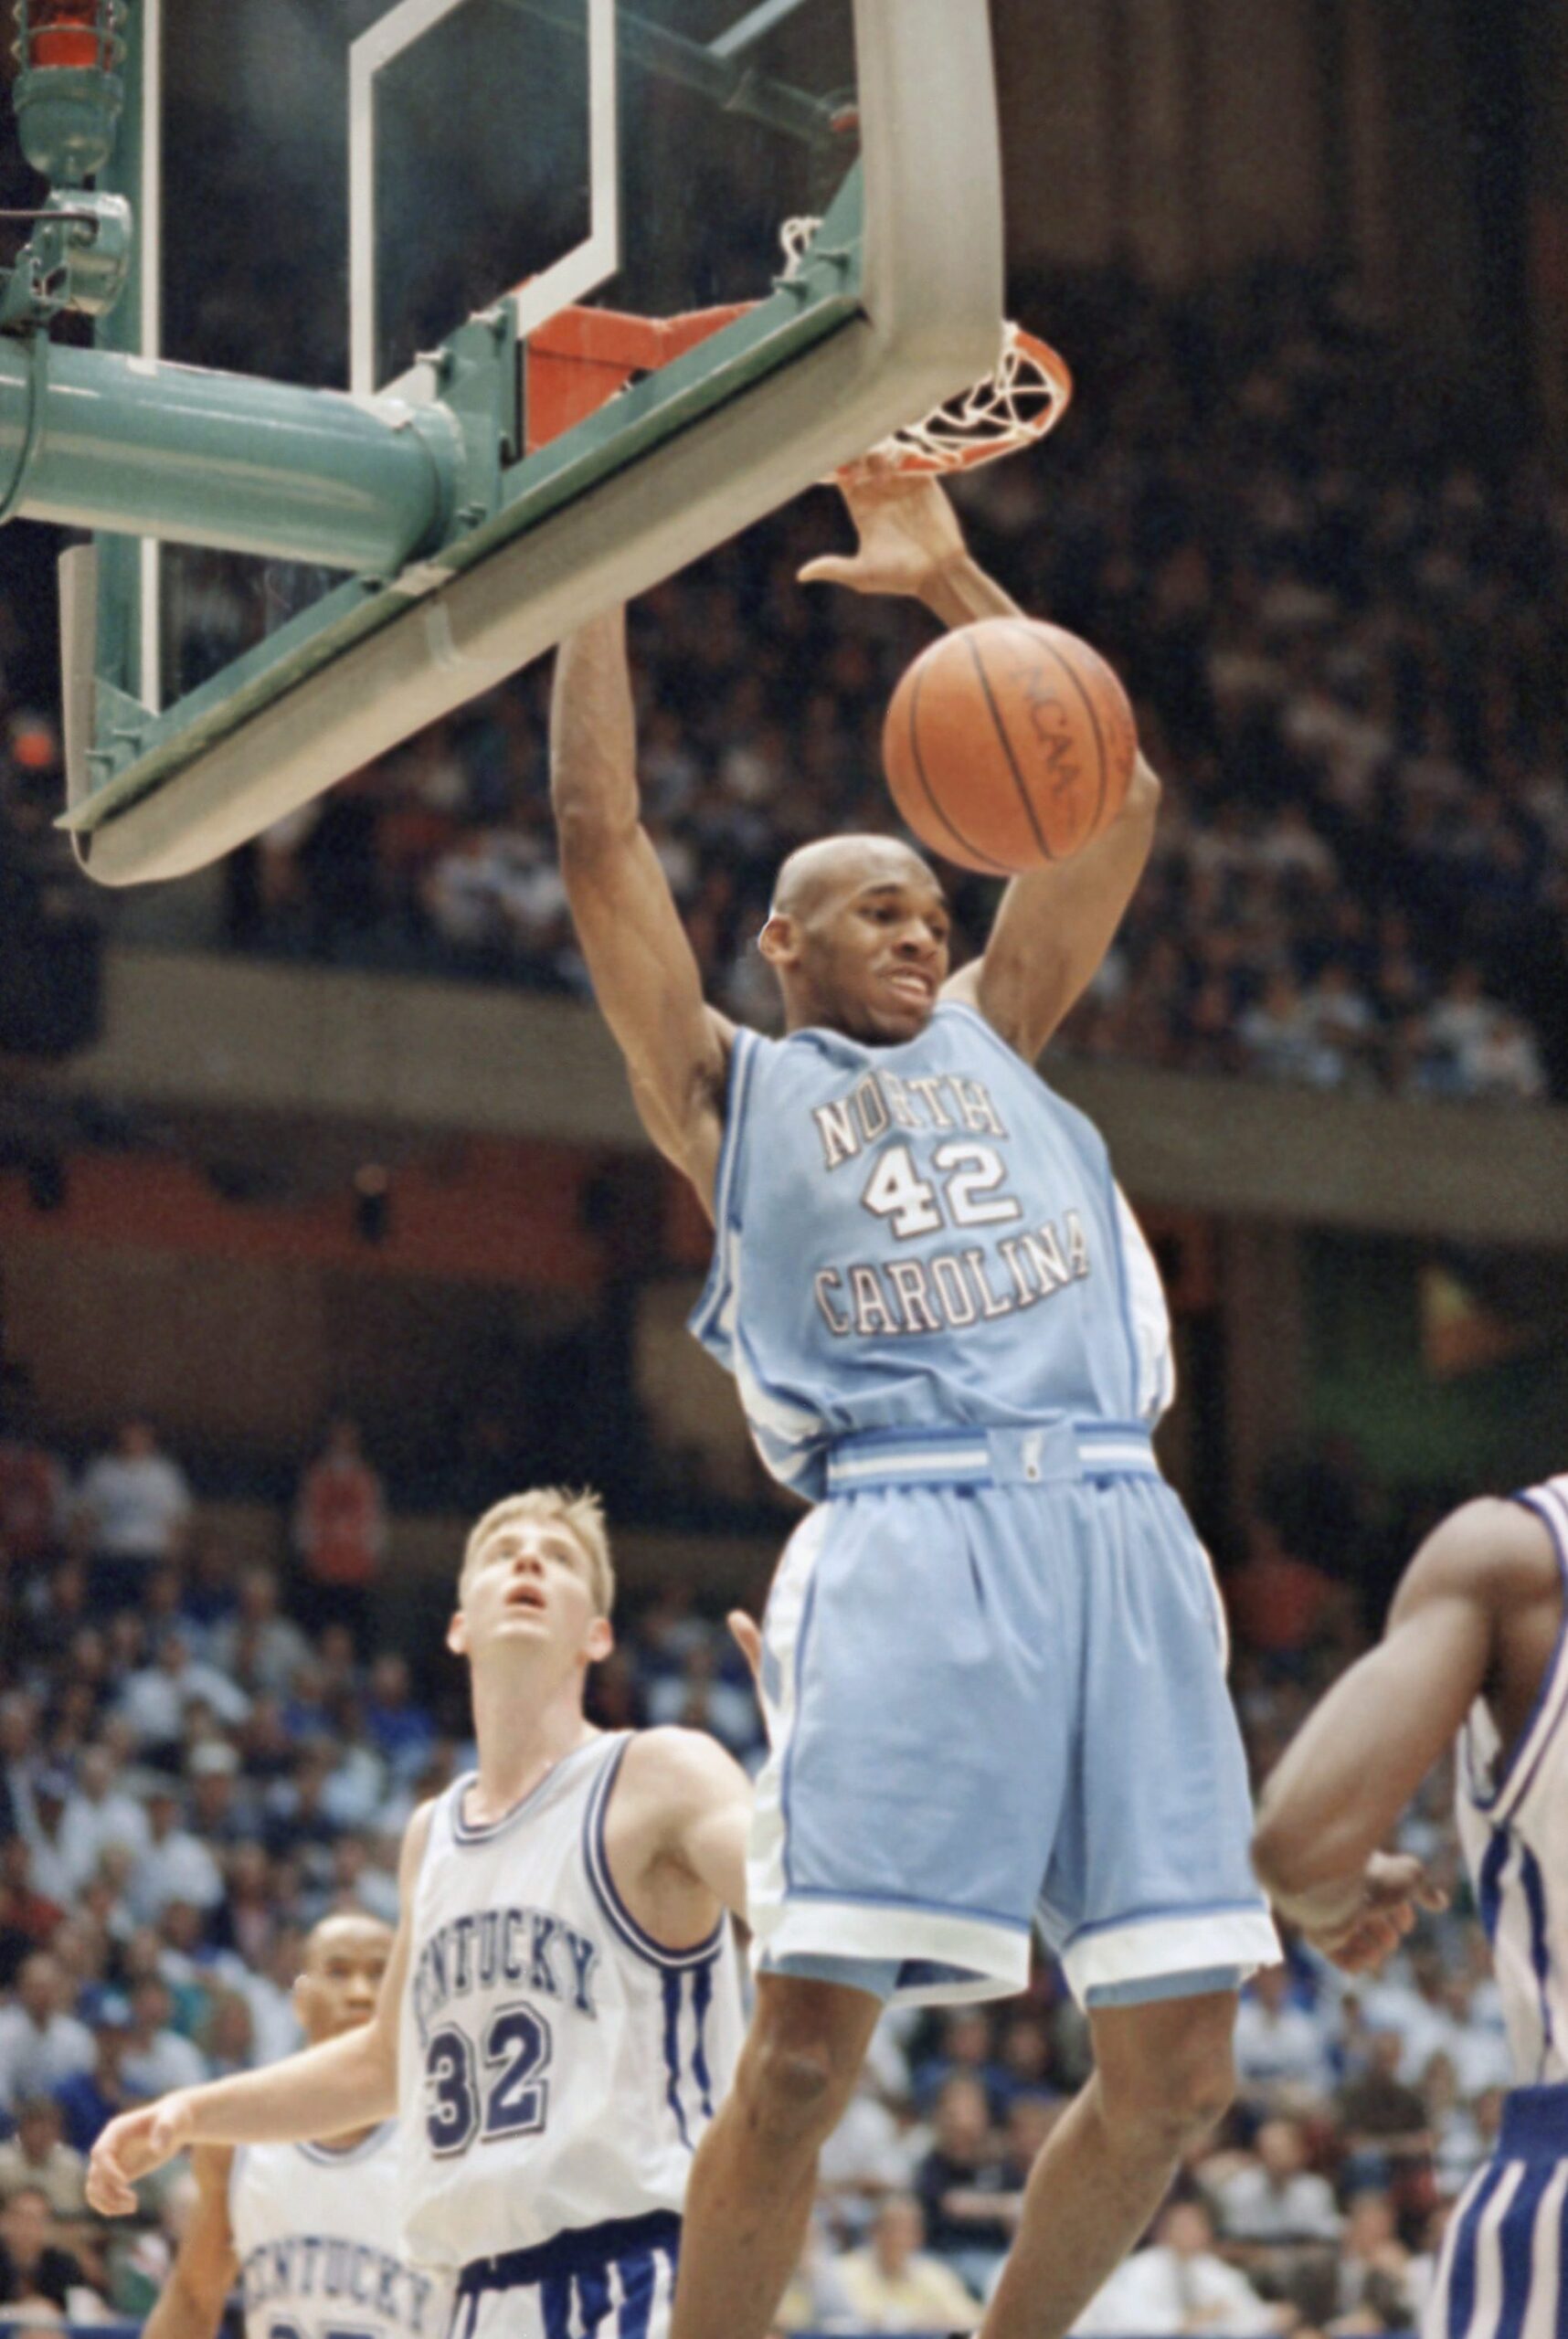 UNC Basketball: Why Jerry Stackhouse might not have gone to UNC